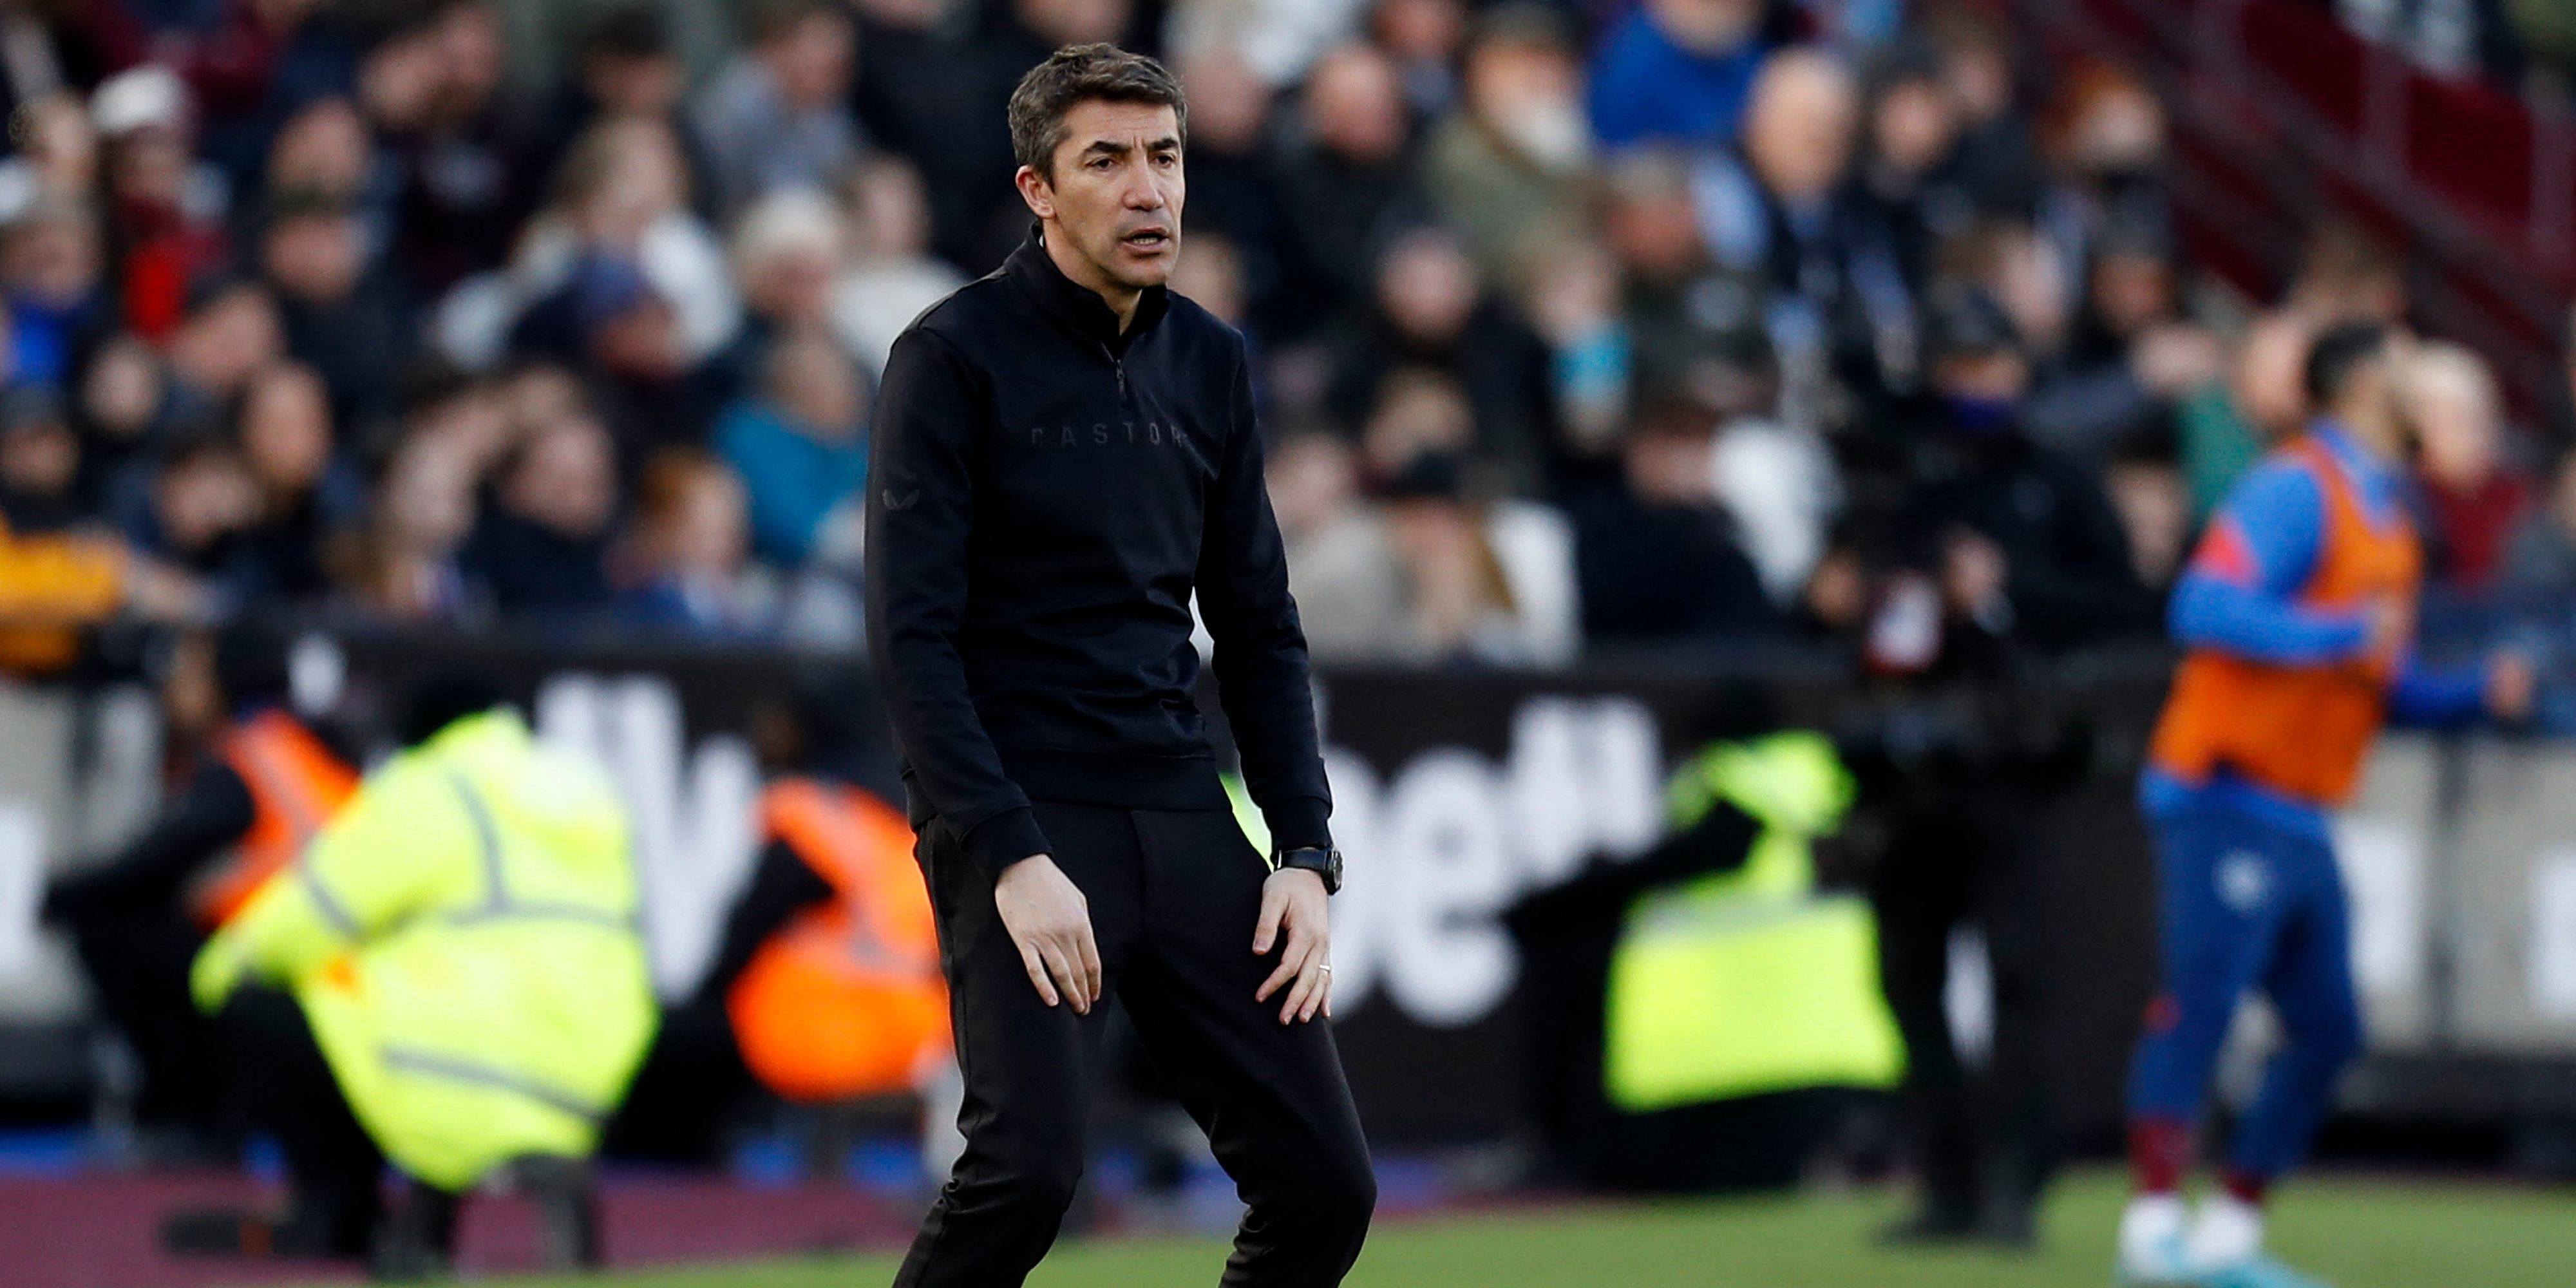 Wolves boss Bruno Lage issues public dressing down of ex-Liverpool star after latest defeat